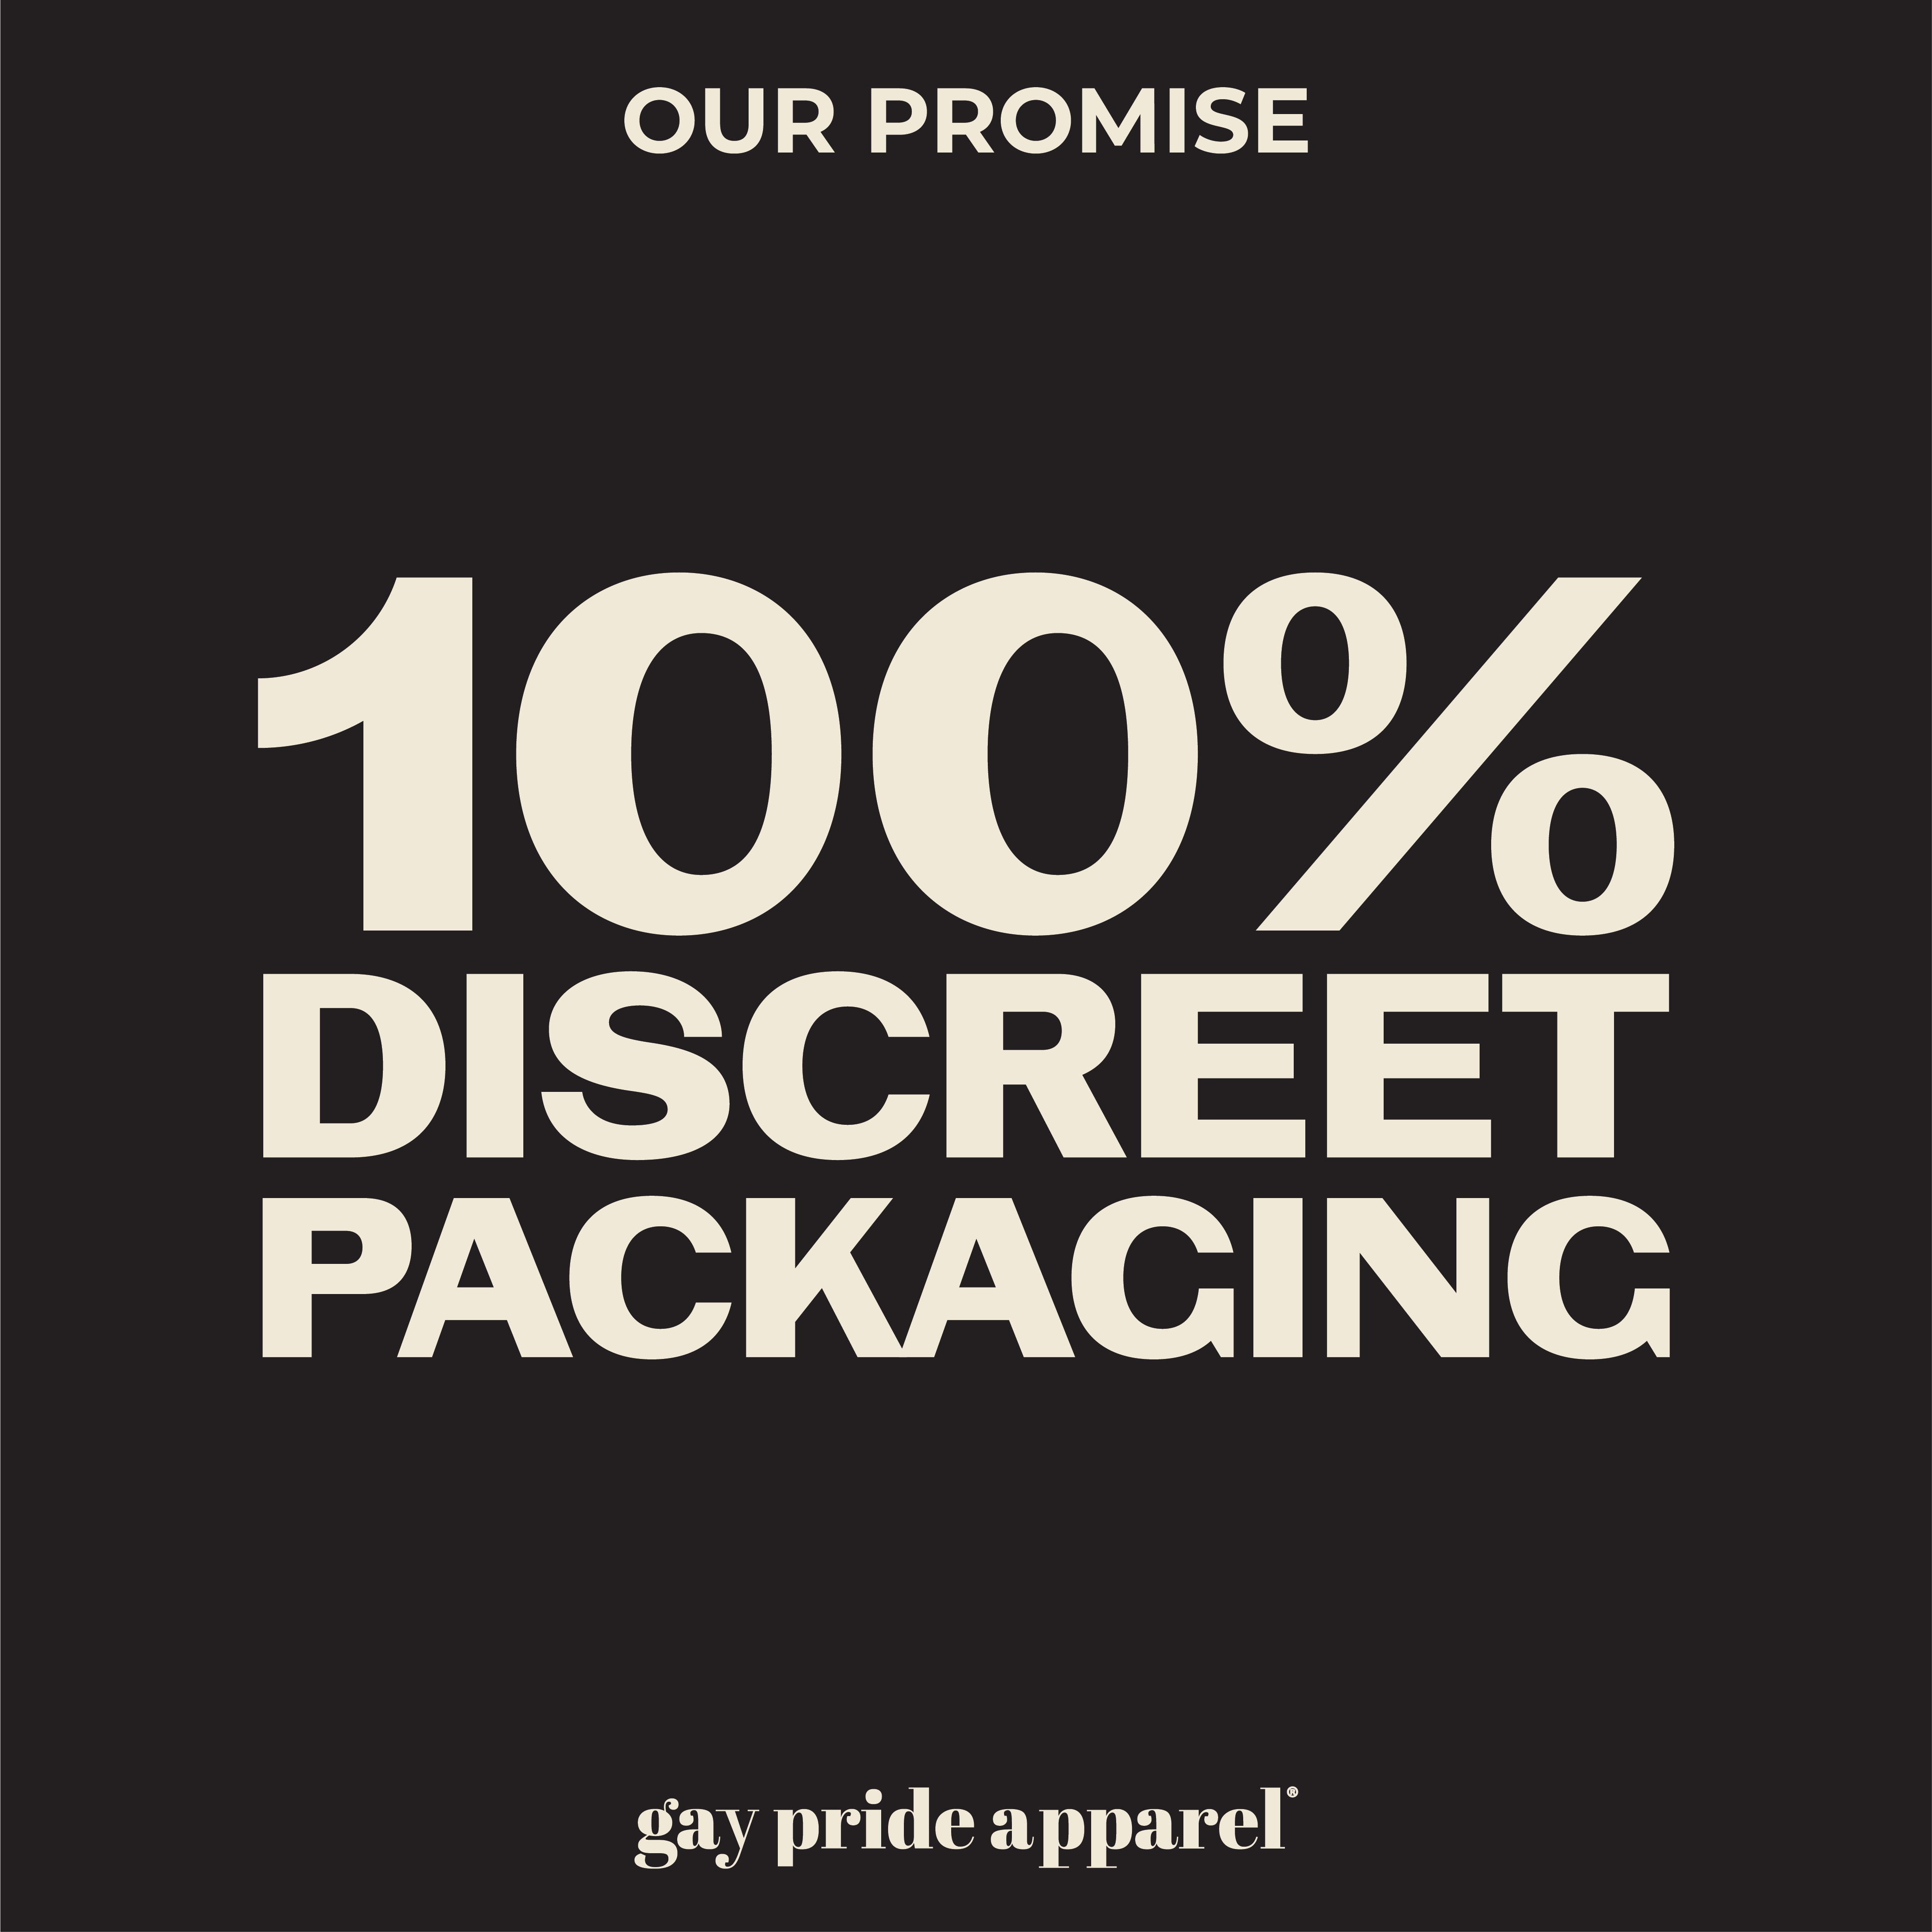 Gay Pride Apparel Offers Discreet Packages for the Safety of LGBTQ+ Customers